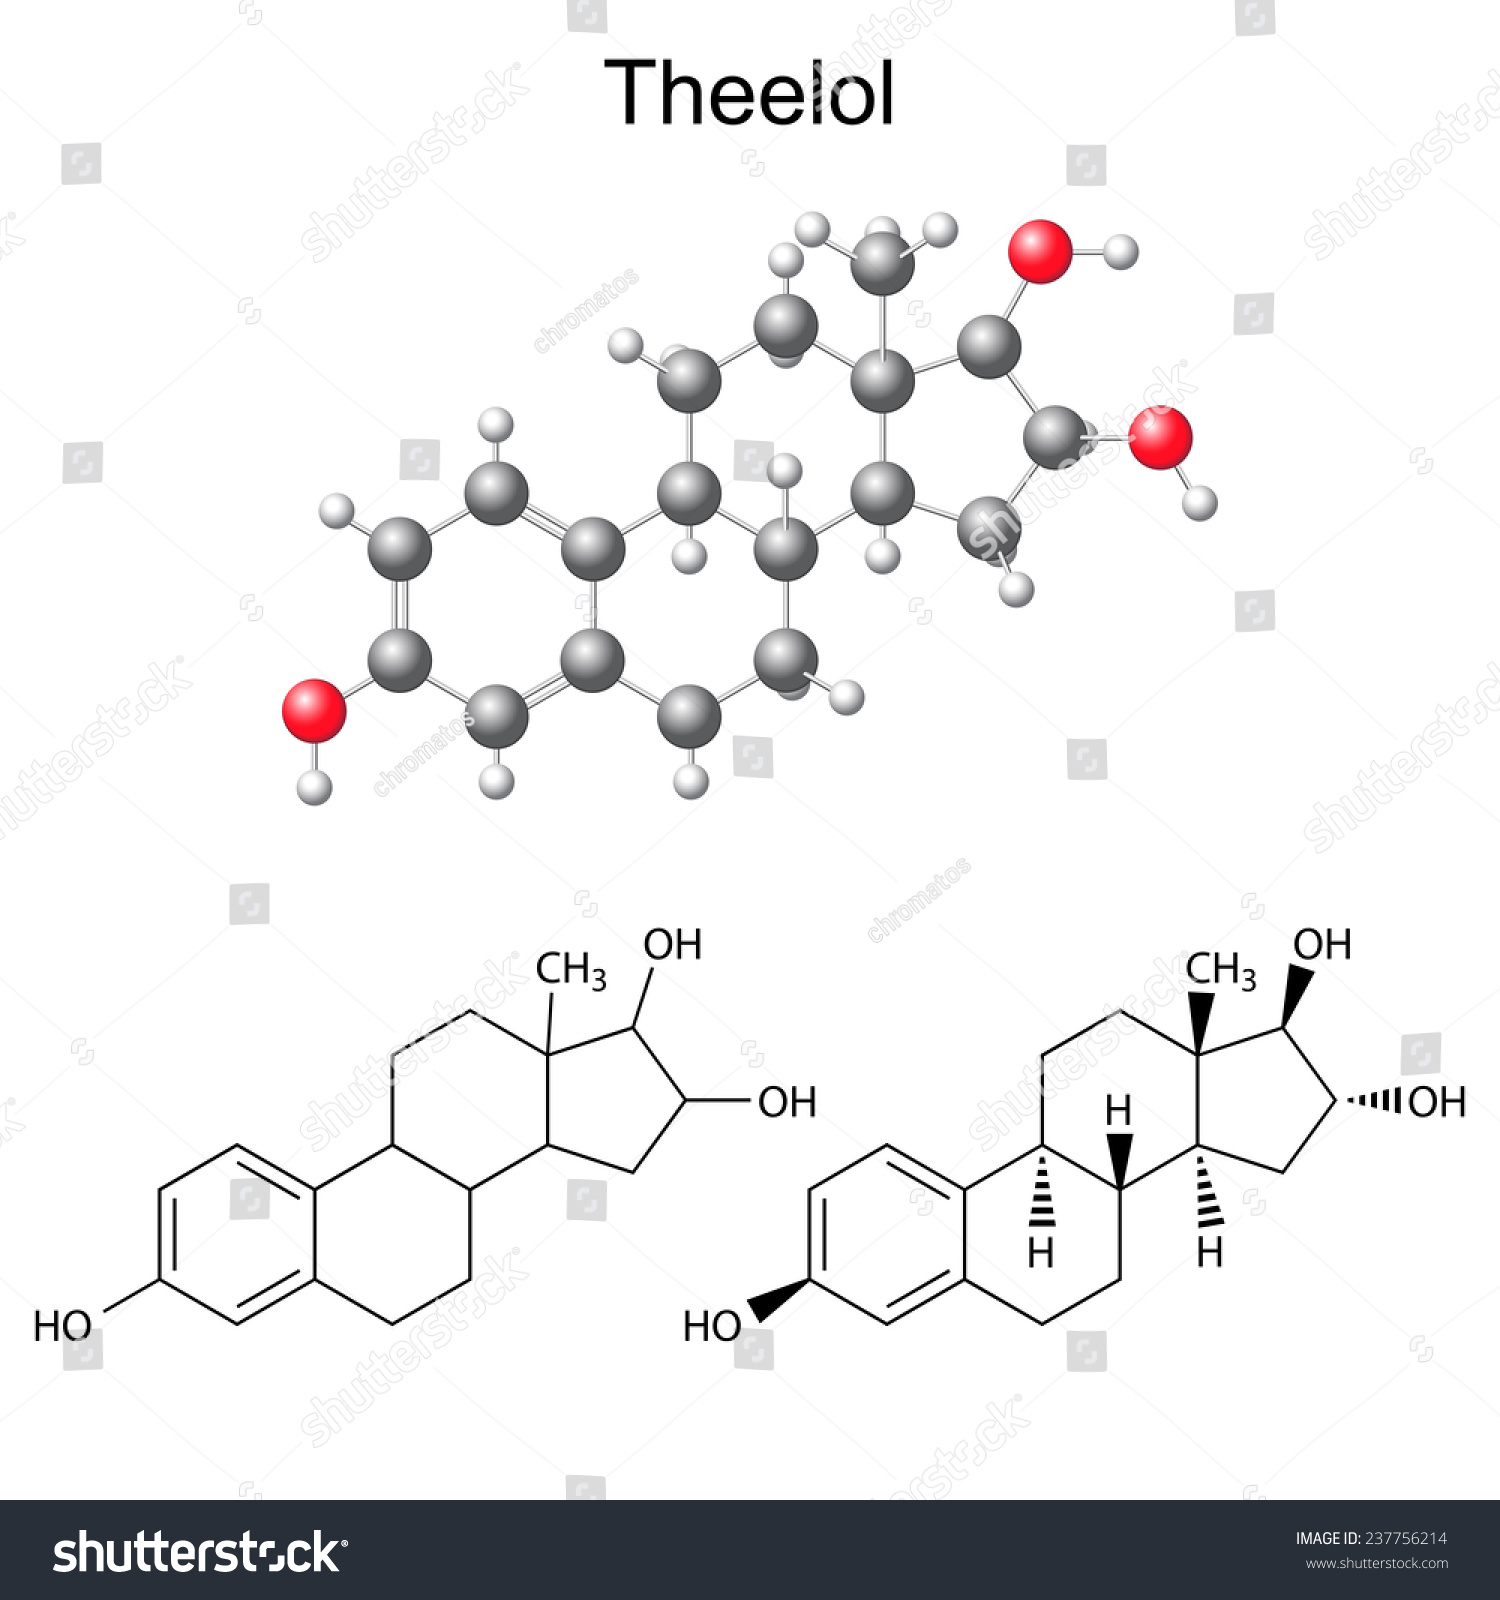 Structural Chemical Formulas Model Theelol Molecule Stock Illustration 237756214 Shutterstock 9820